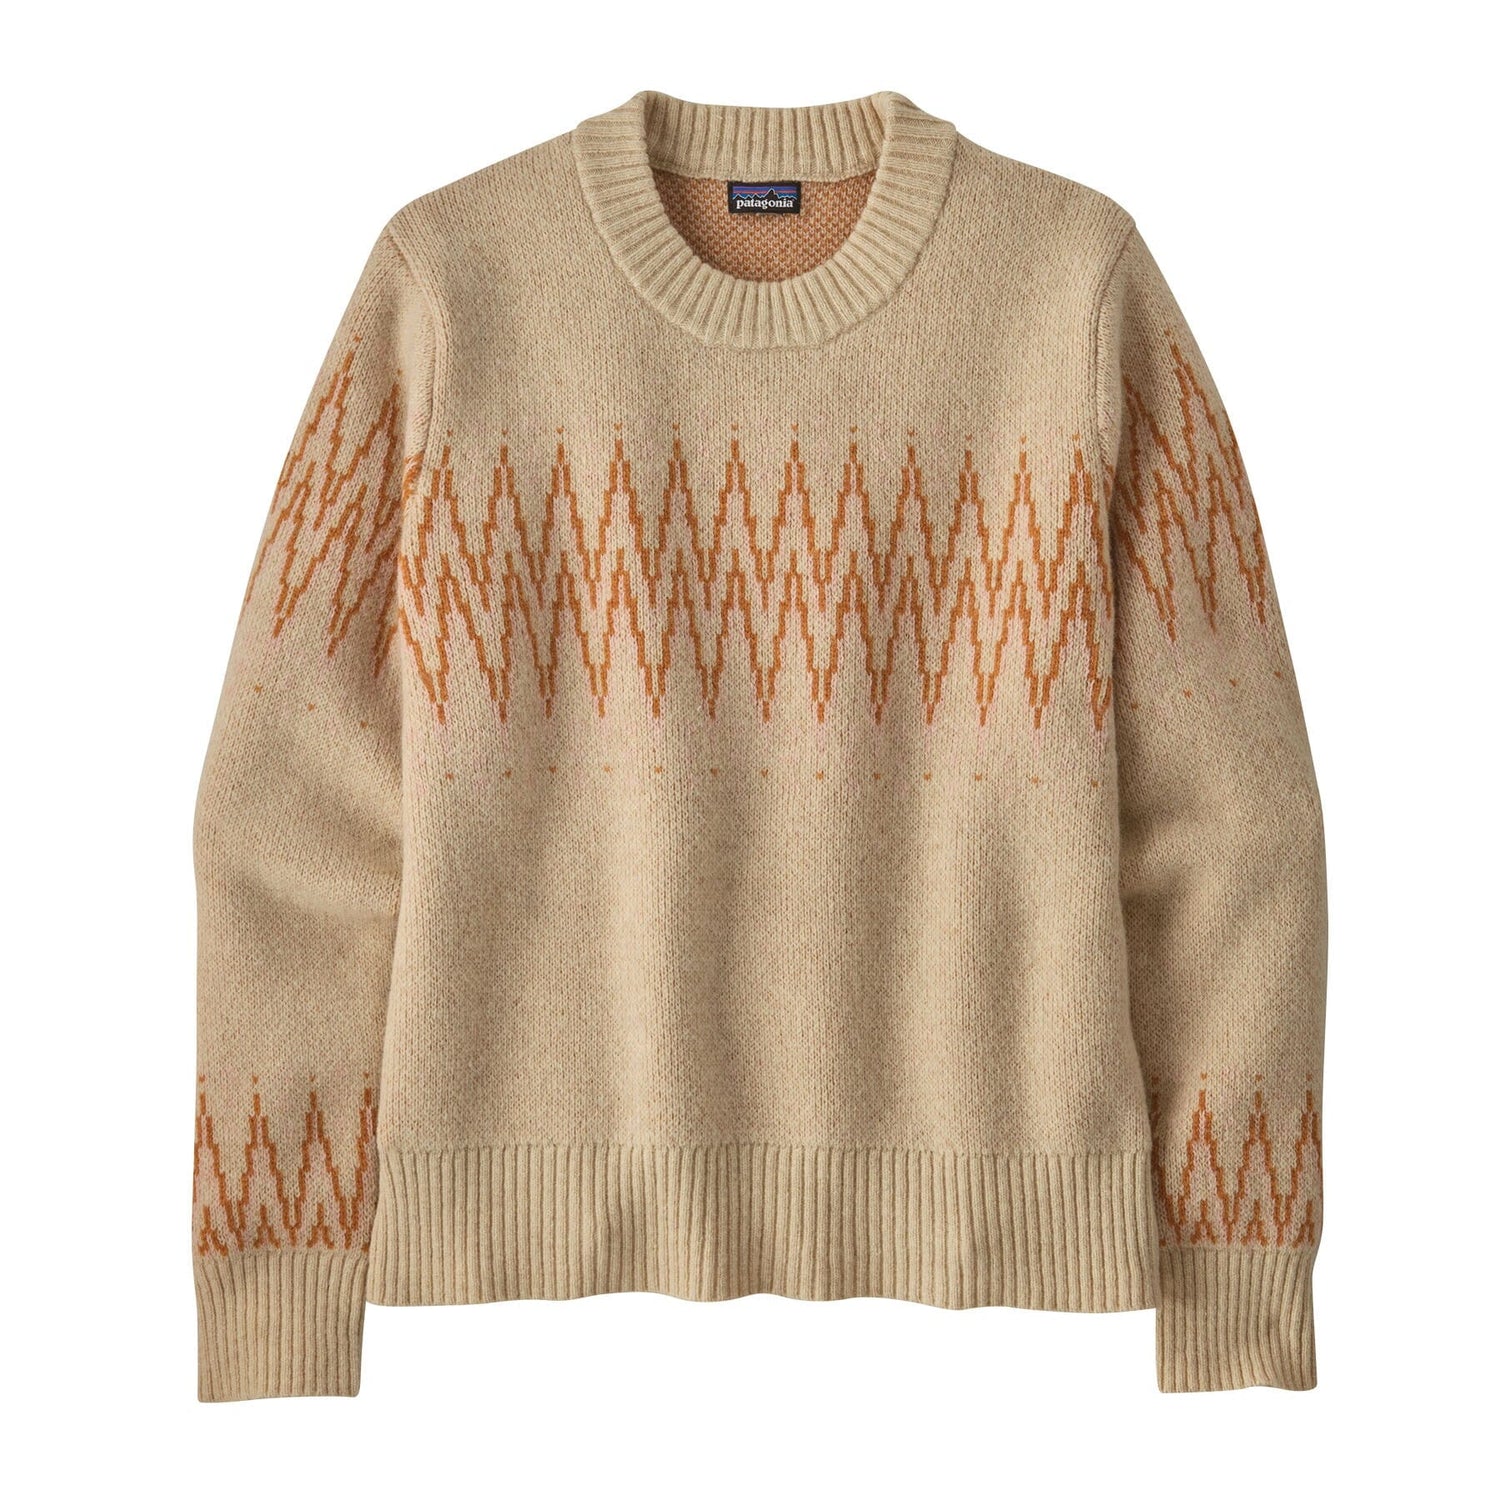 Patagonia W's Crewneck Sweater - Recycled Wool-Blend Sea Song: Natural Shirt